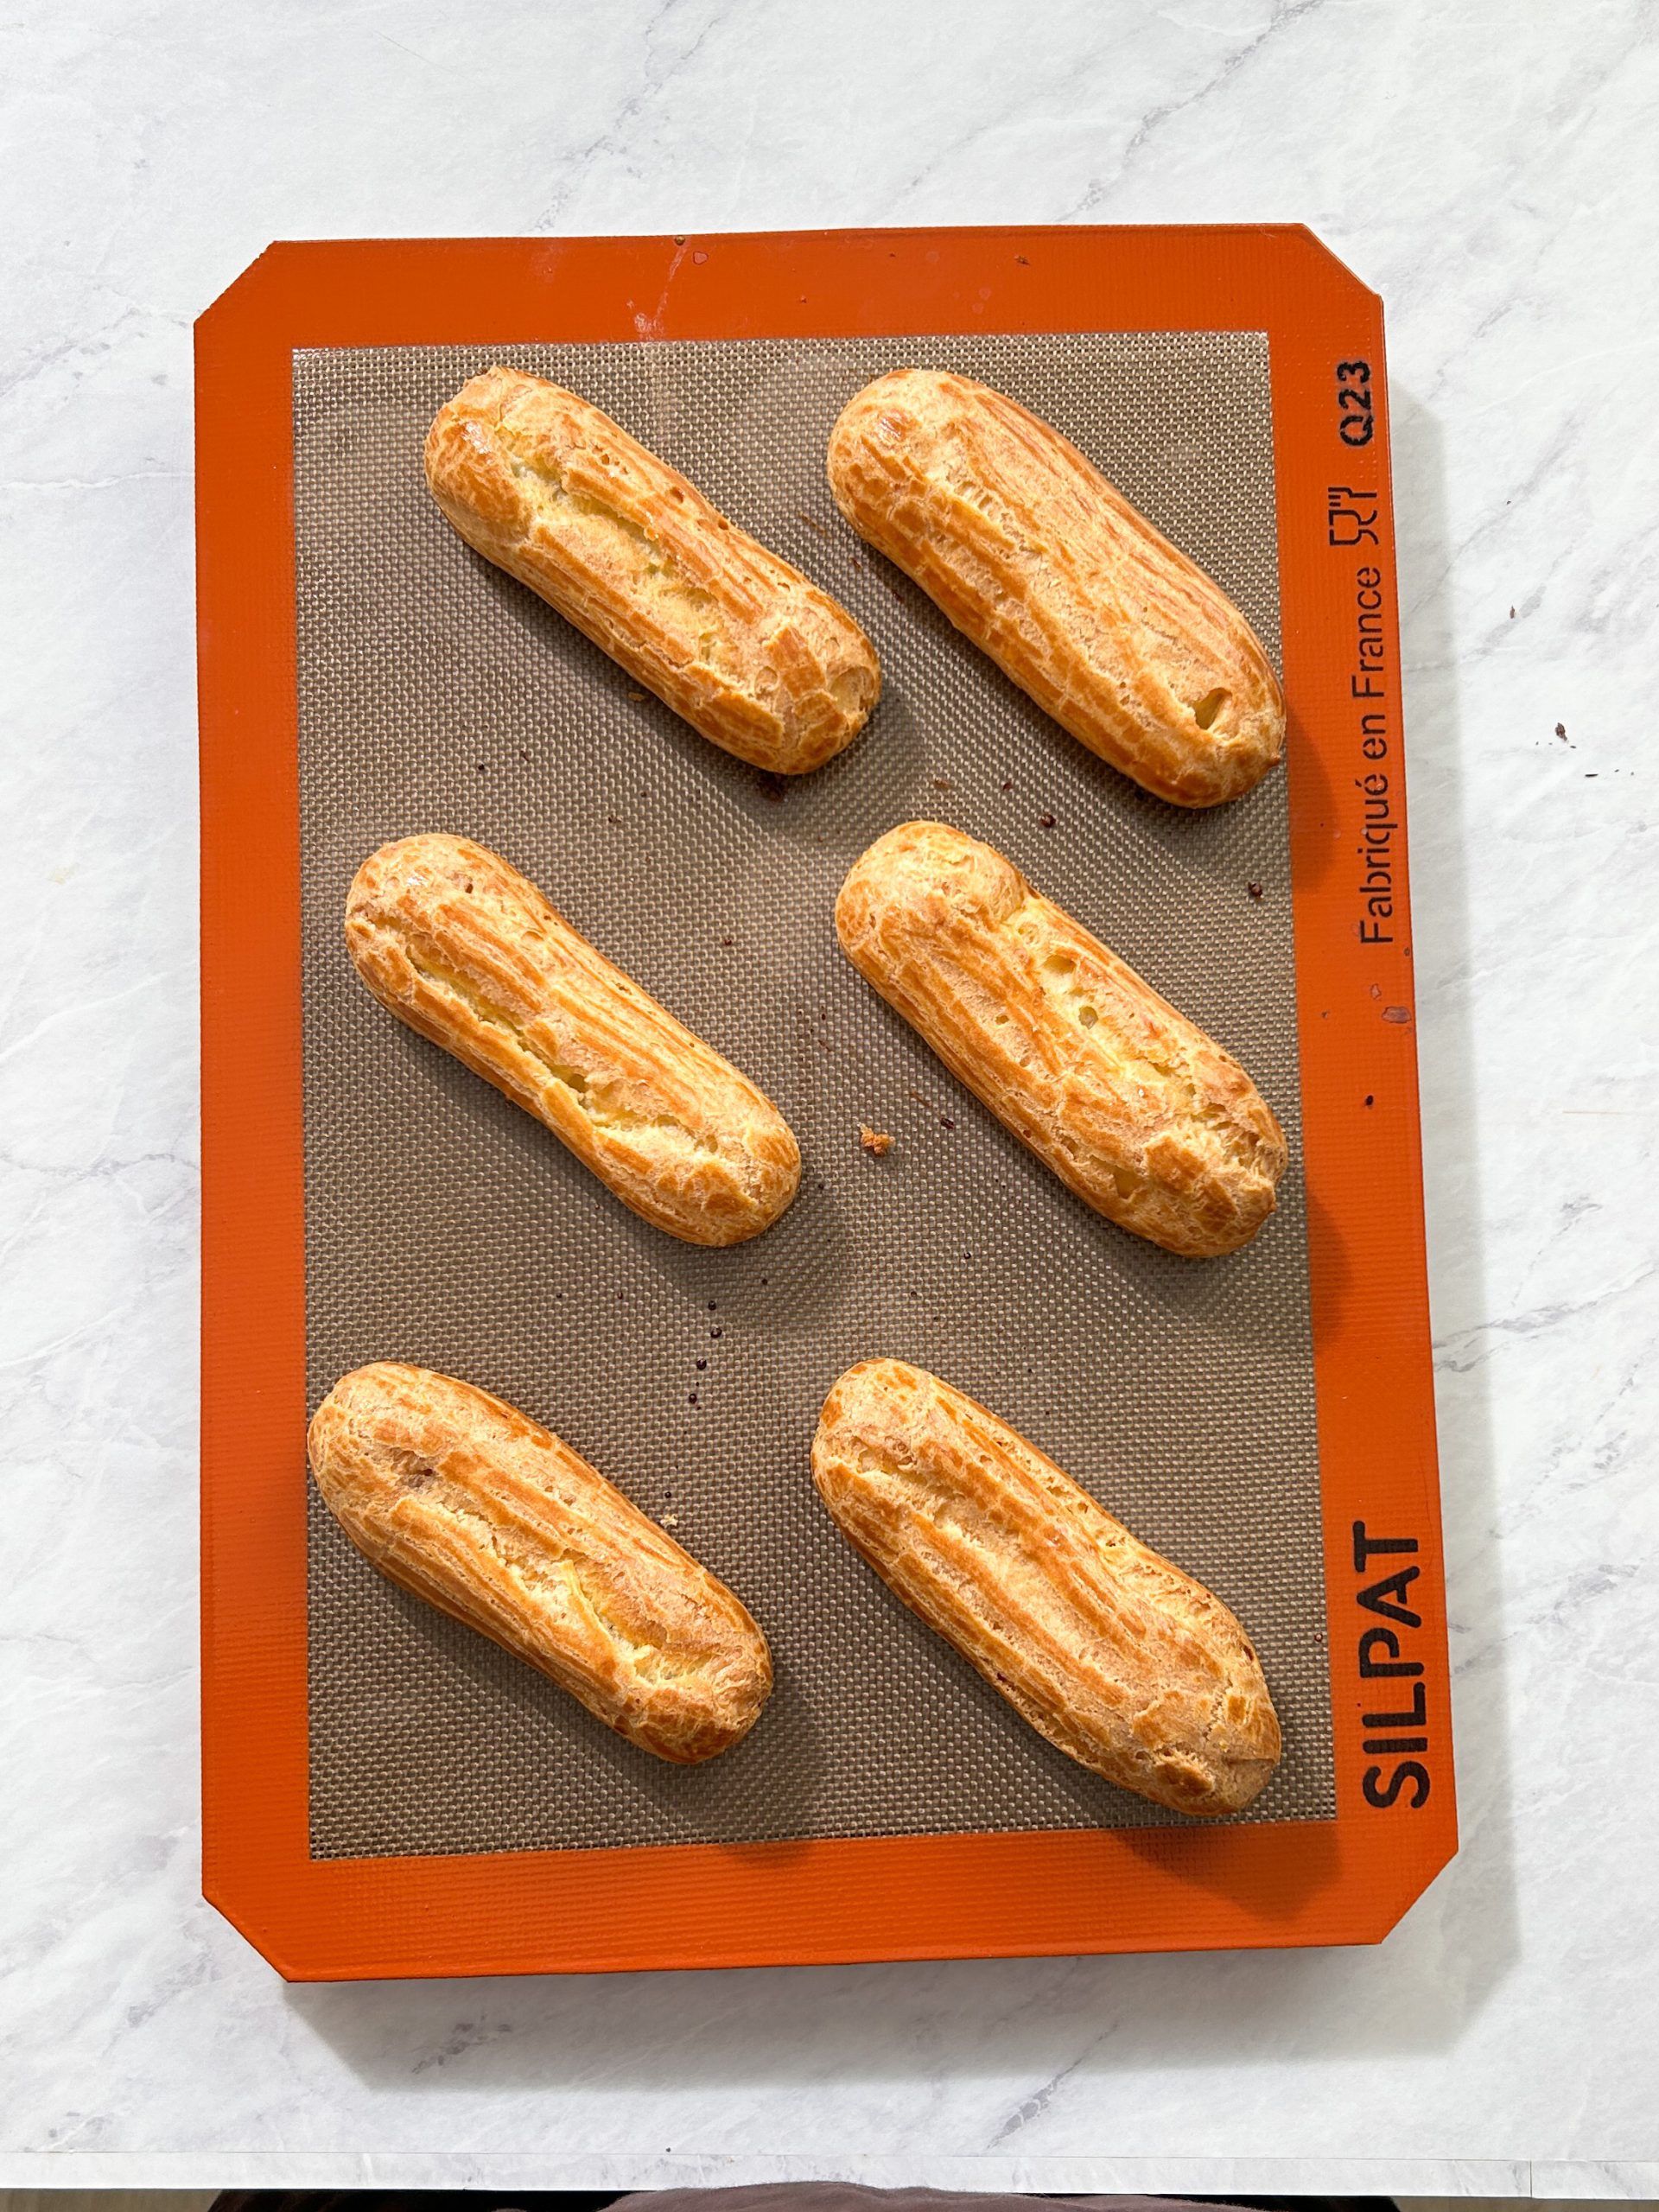 6 baked eclairs with golden brown color on baking sheet